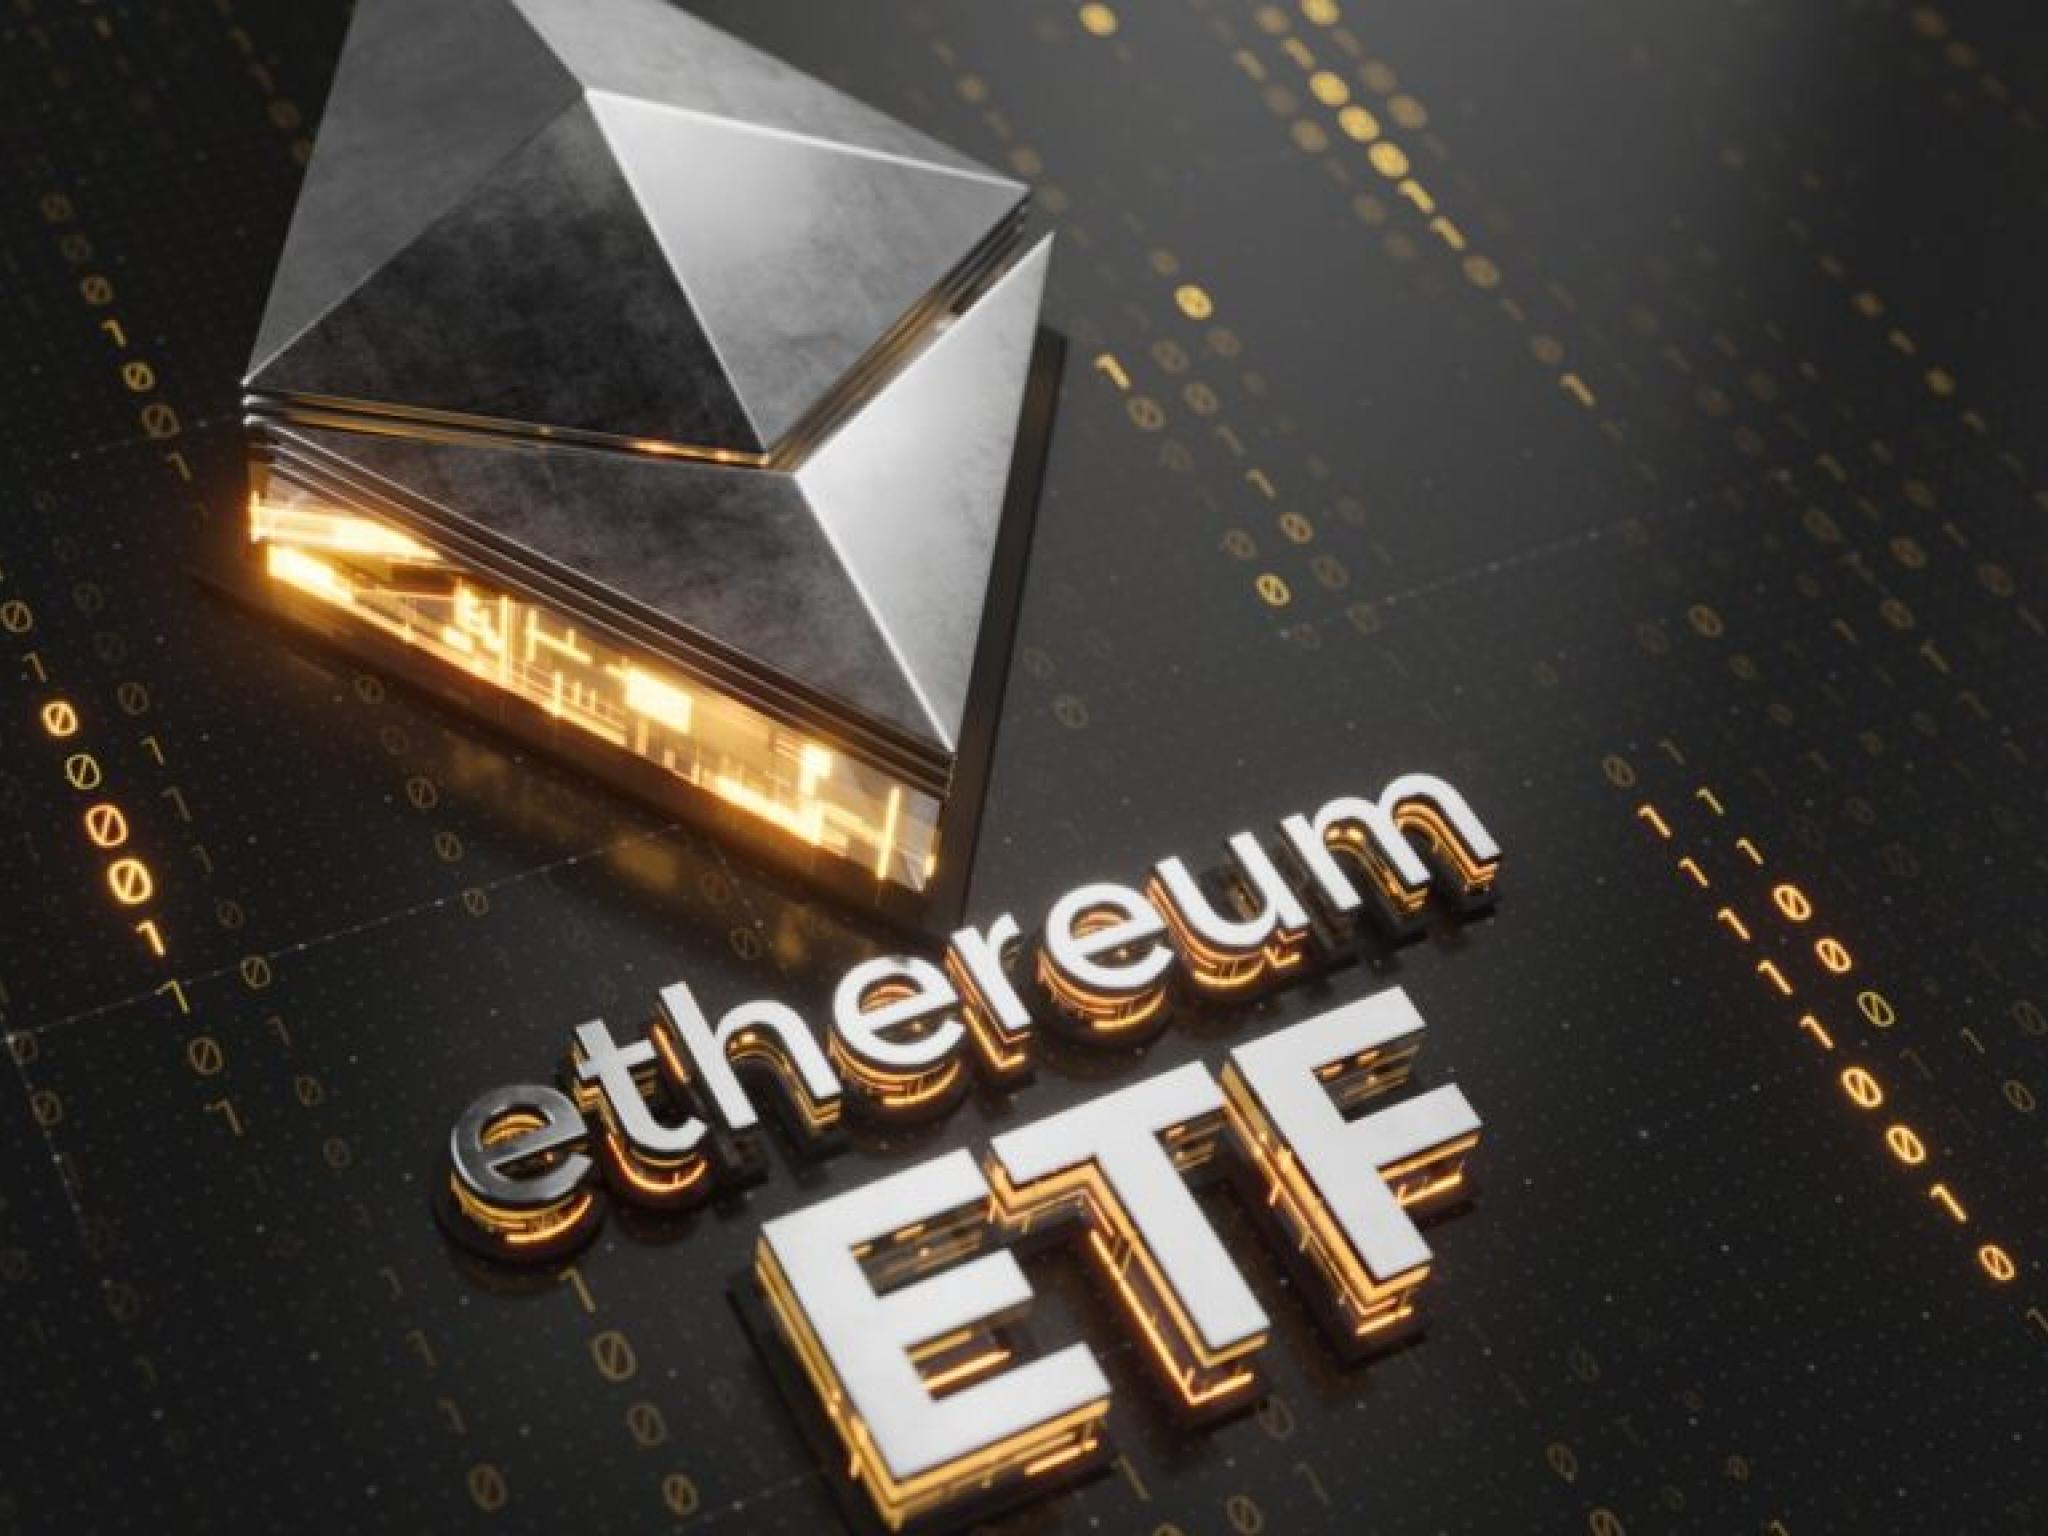  spot-ethereum-etfs-to-go-live-this-week-analyst-outlines-possibility-after-saying-no-reason-for-delay-earlier 